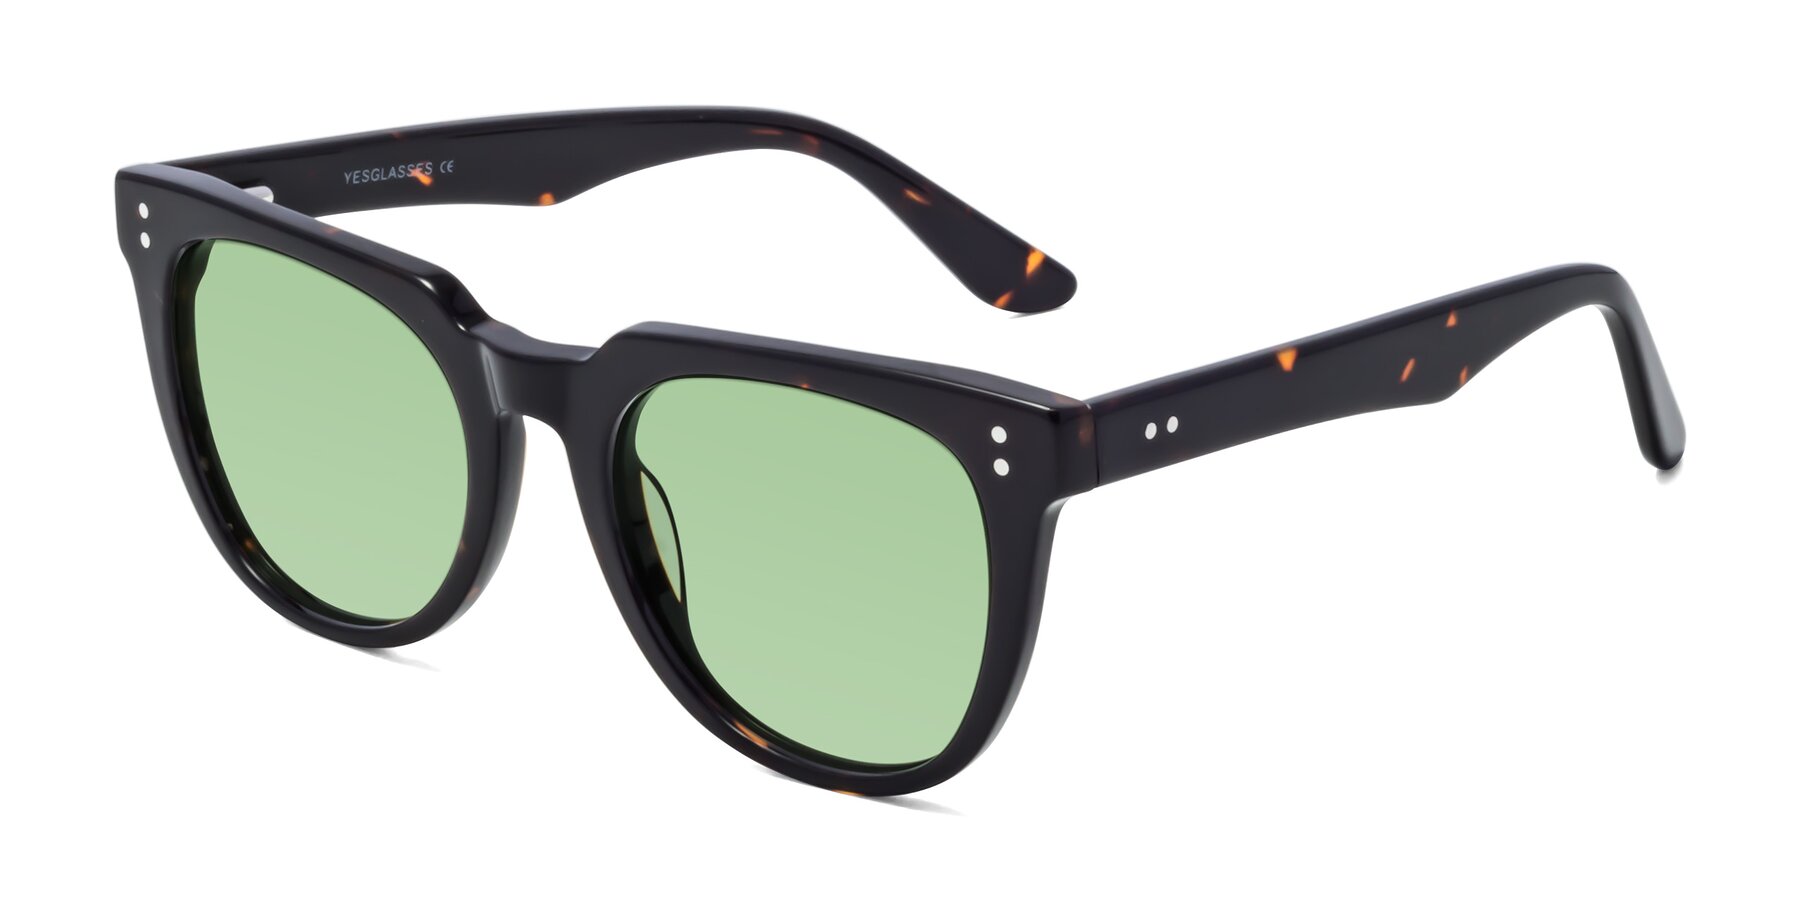 Angle of Graceful in Tortoise with Medium Green Tinted Lenses